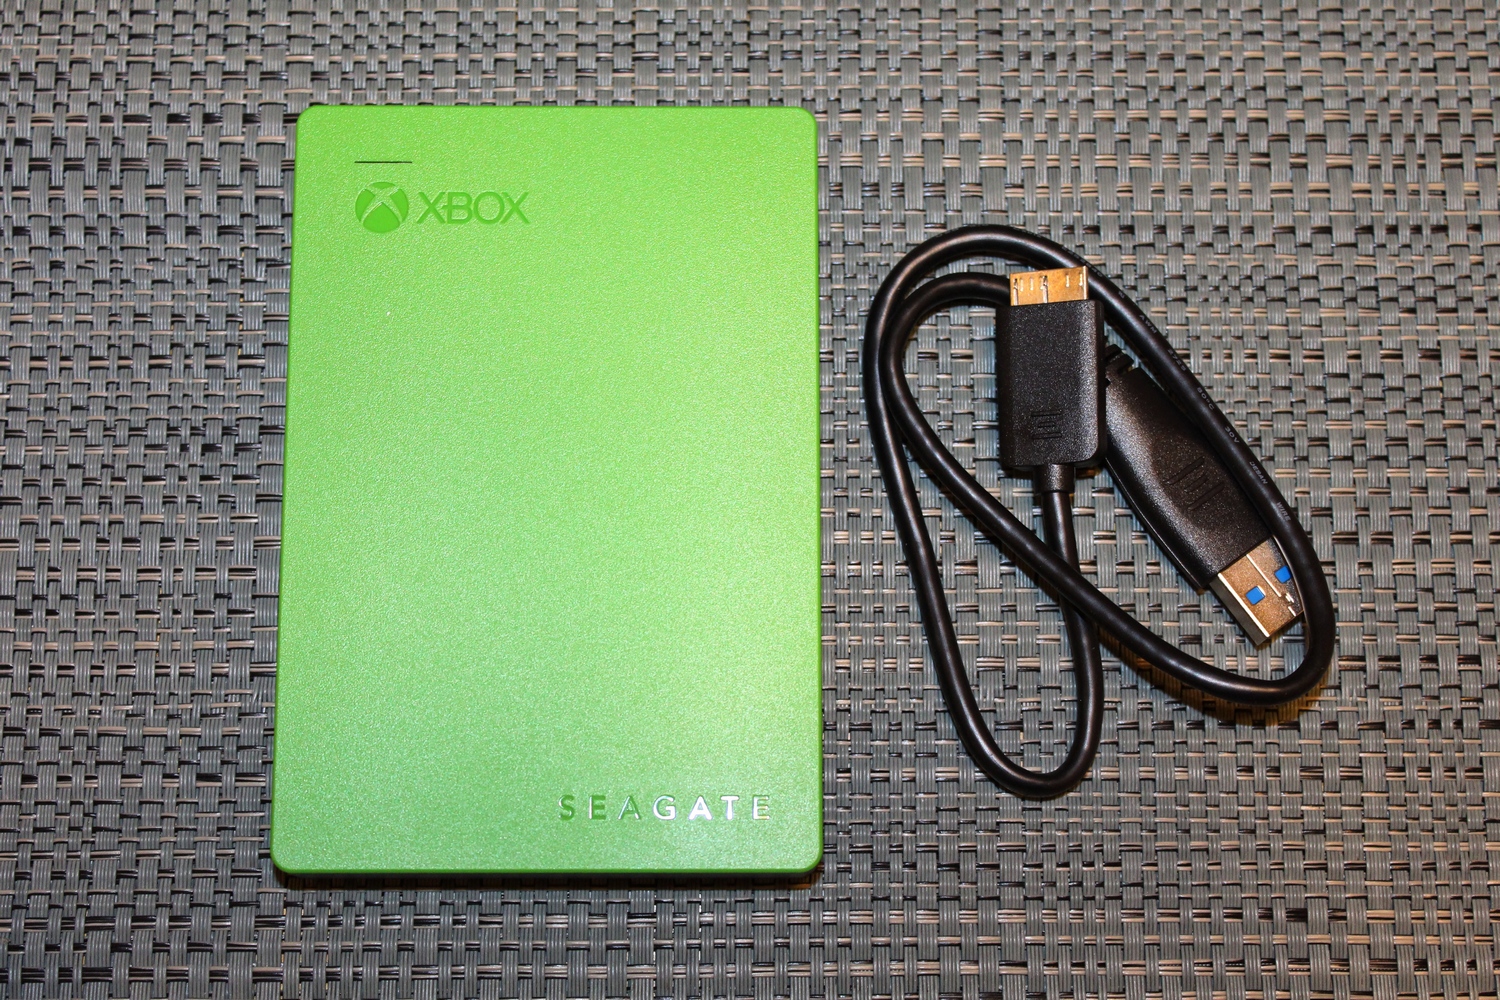 terabyte hard drive for xbox one